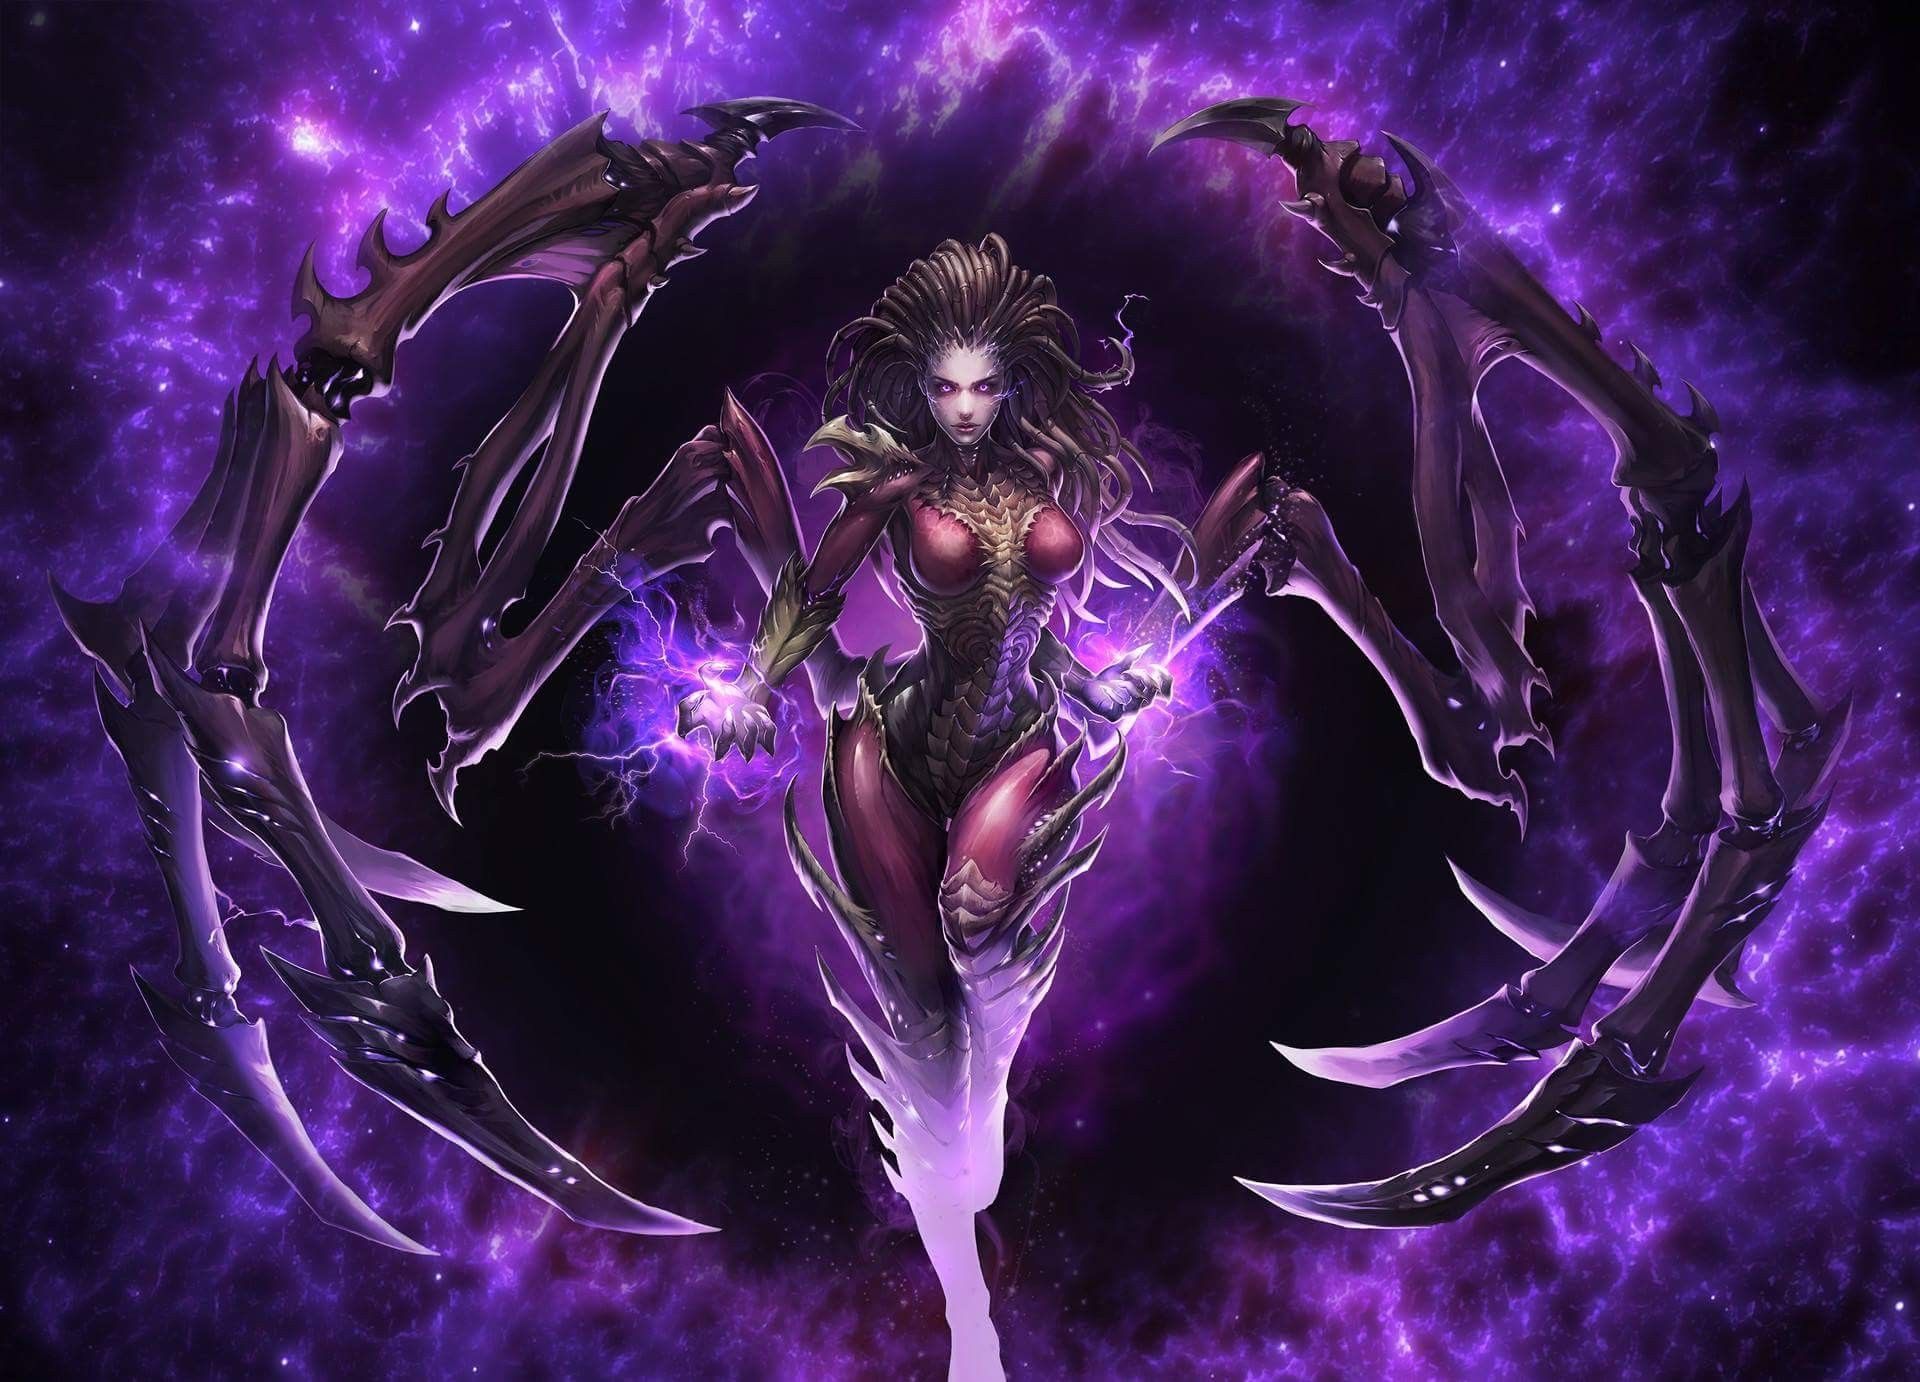 General 1920x1382 StarCraft Starcraft II StarCraft II : Heart Of The Swarm Starcraft II: Legacy of the Void StarCraft II: Wings of Liberty Blizzard Entertainment BlizzCon Sarah Kerrigan